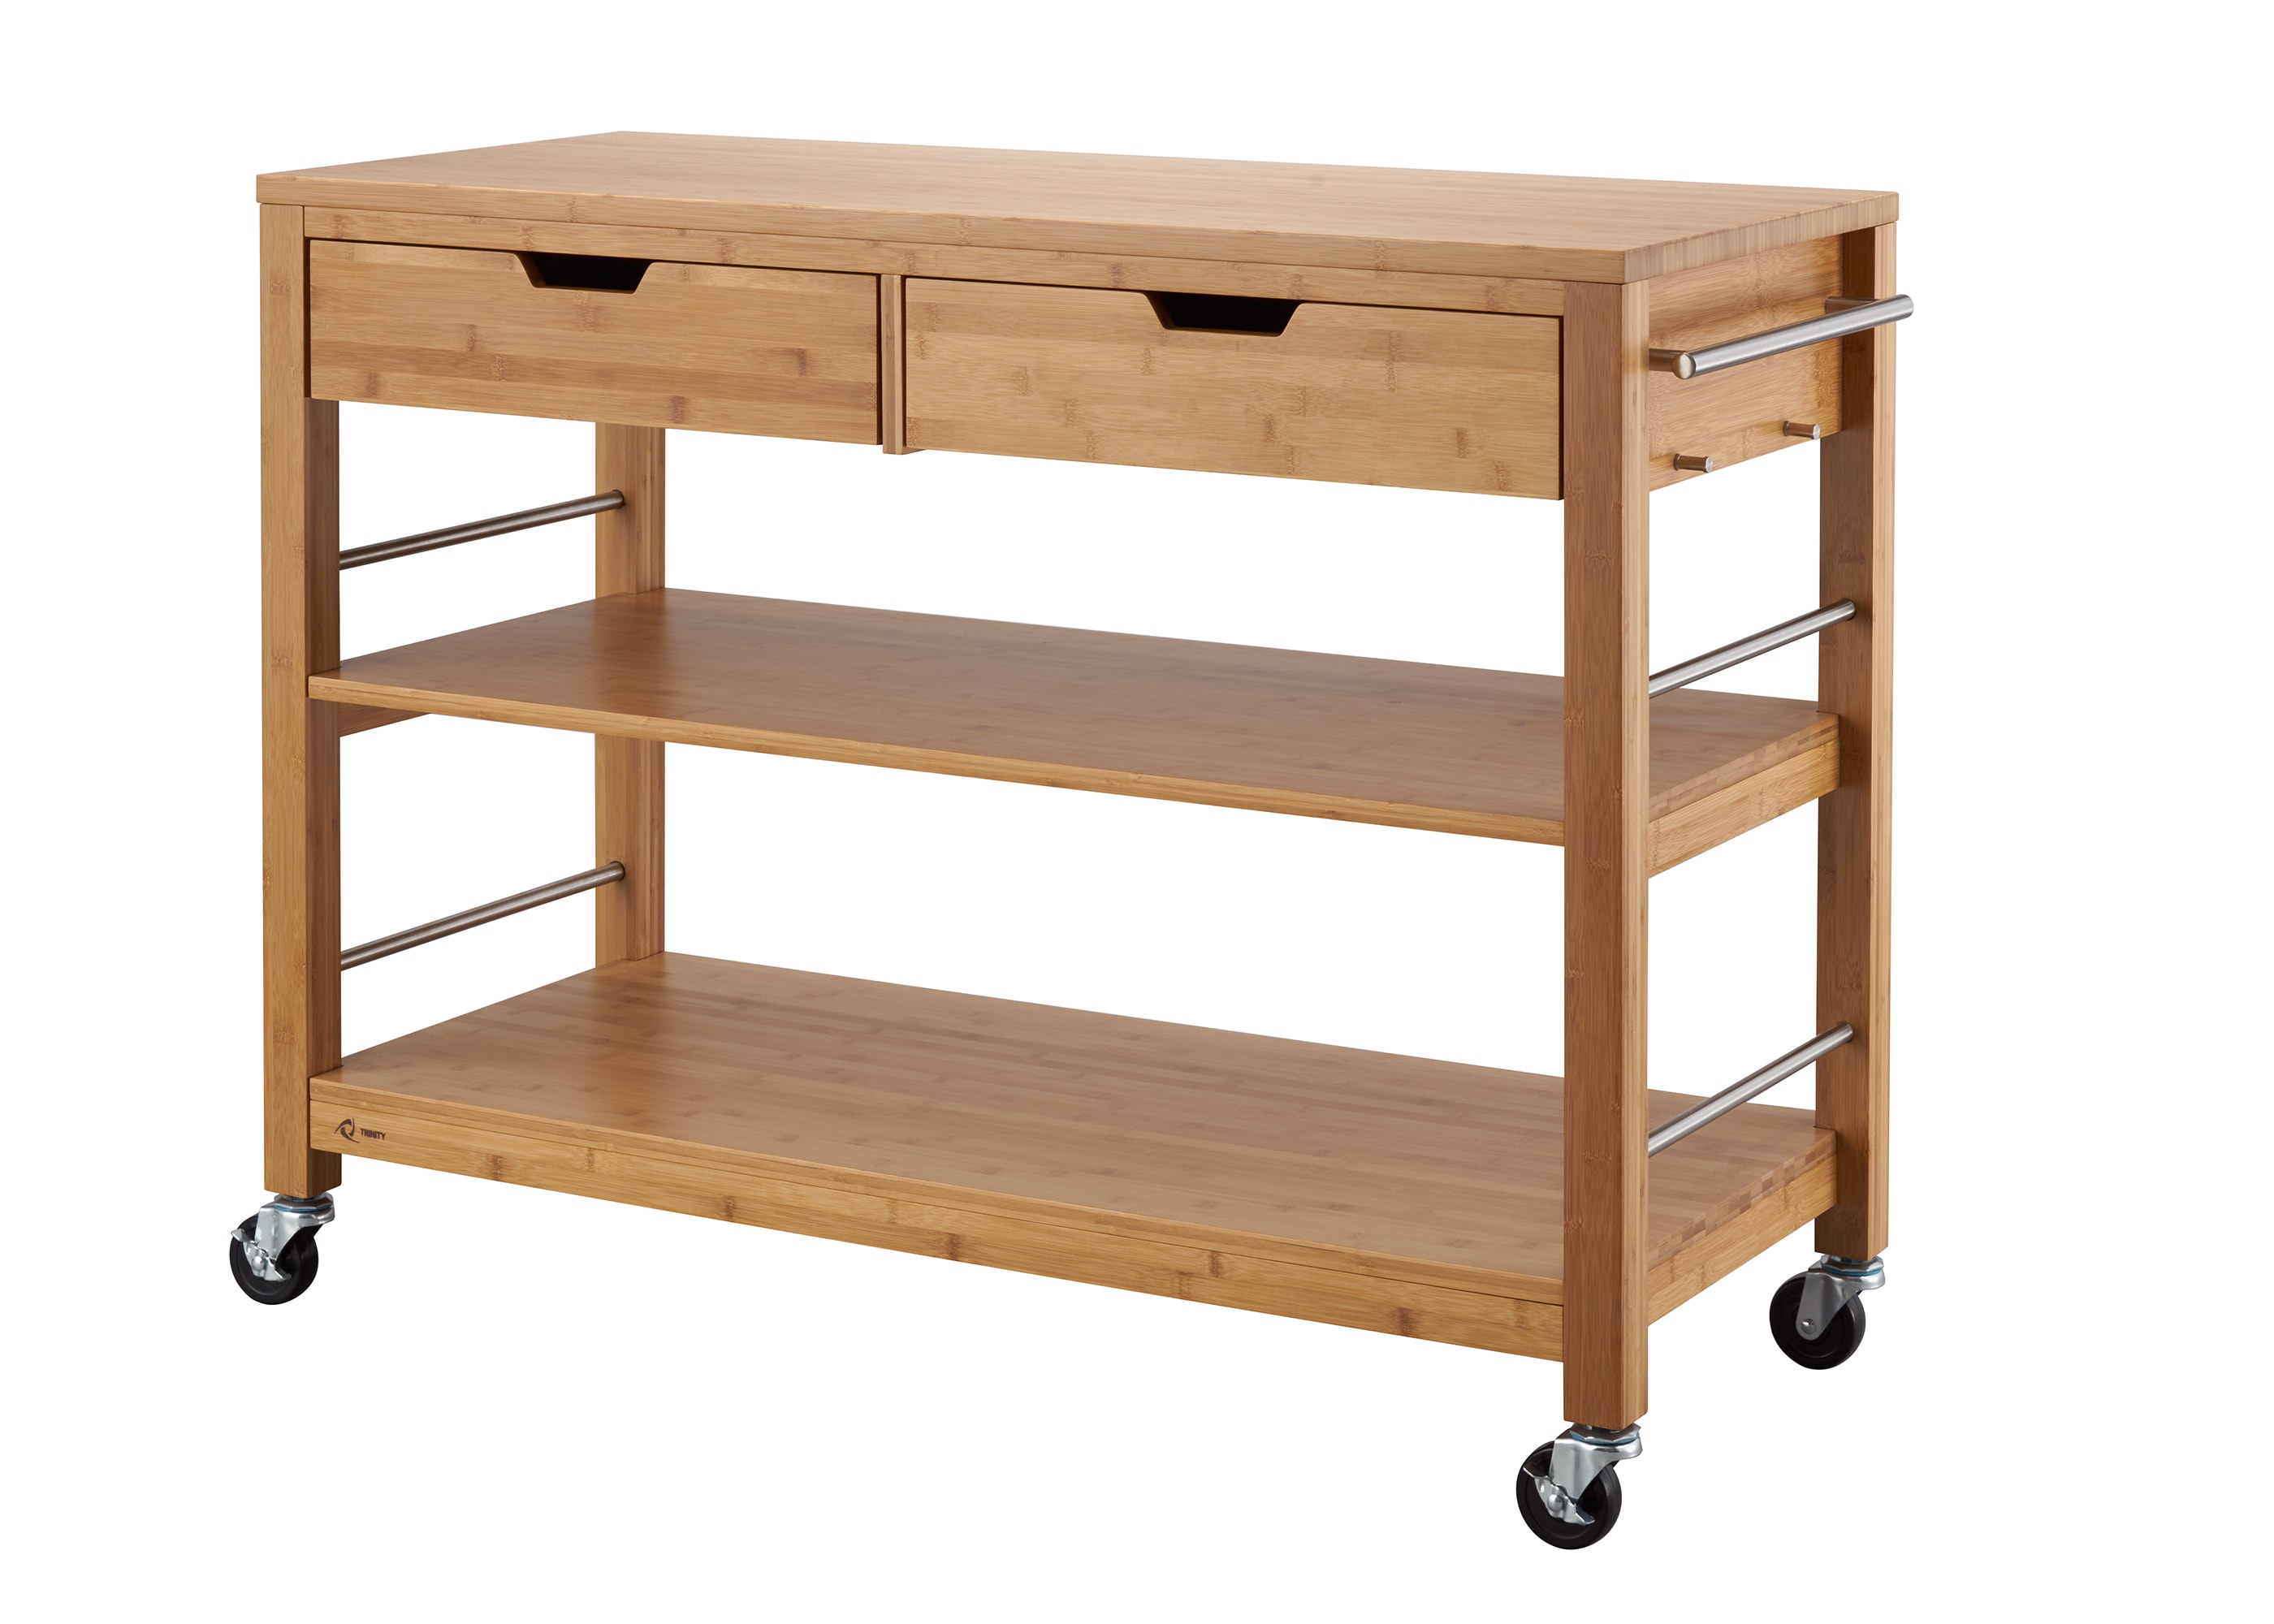 Trinity Bamboo 48 in. Kitchen Island with Drawers